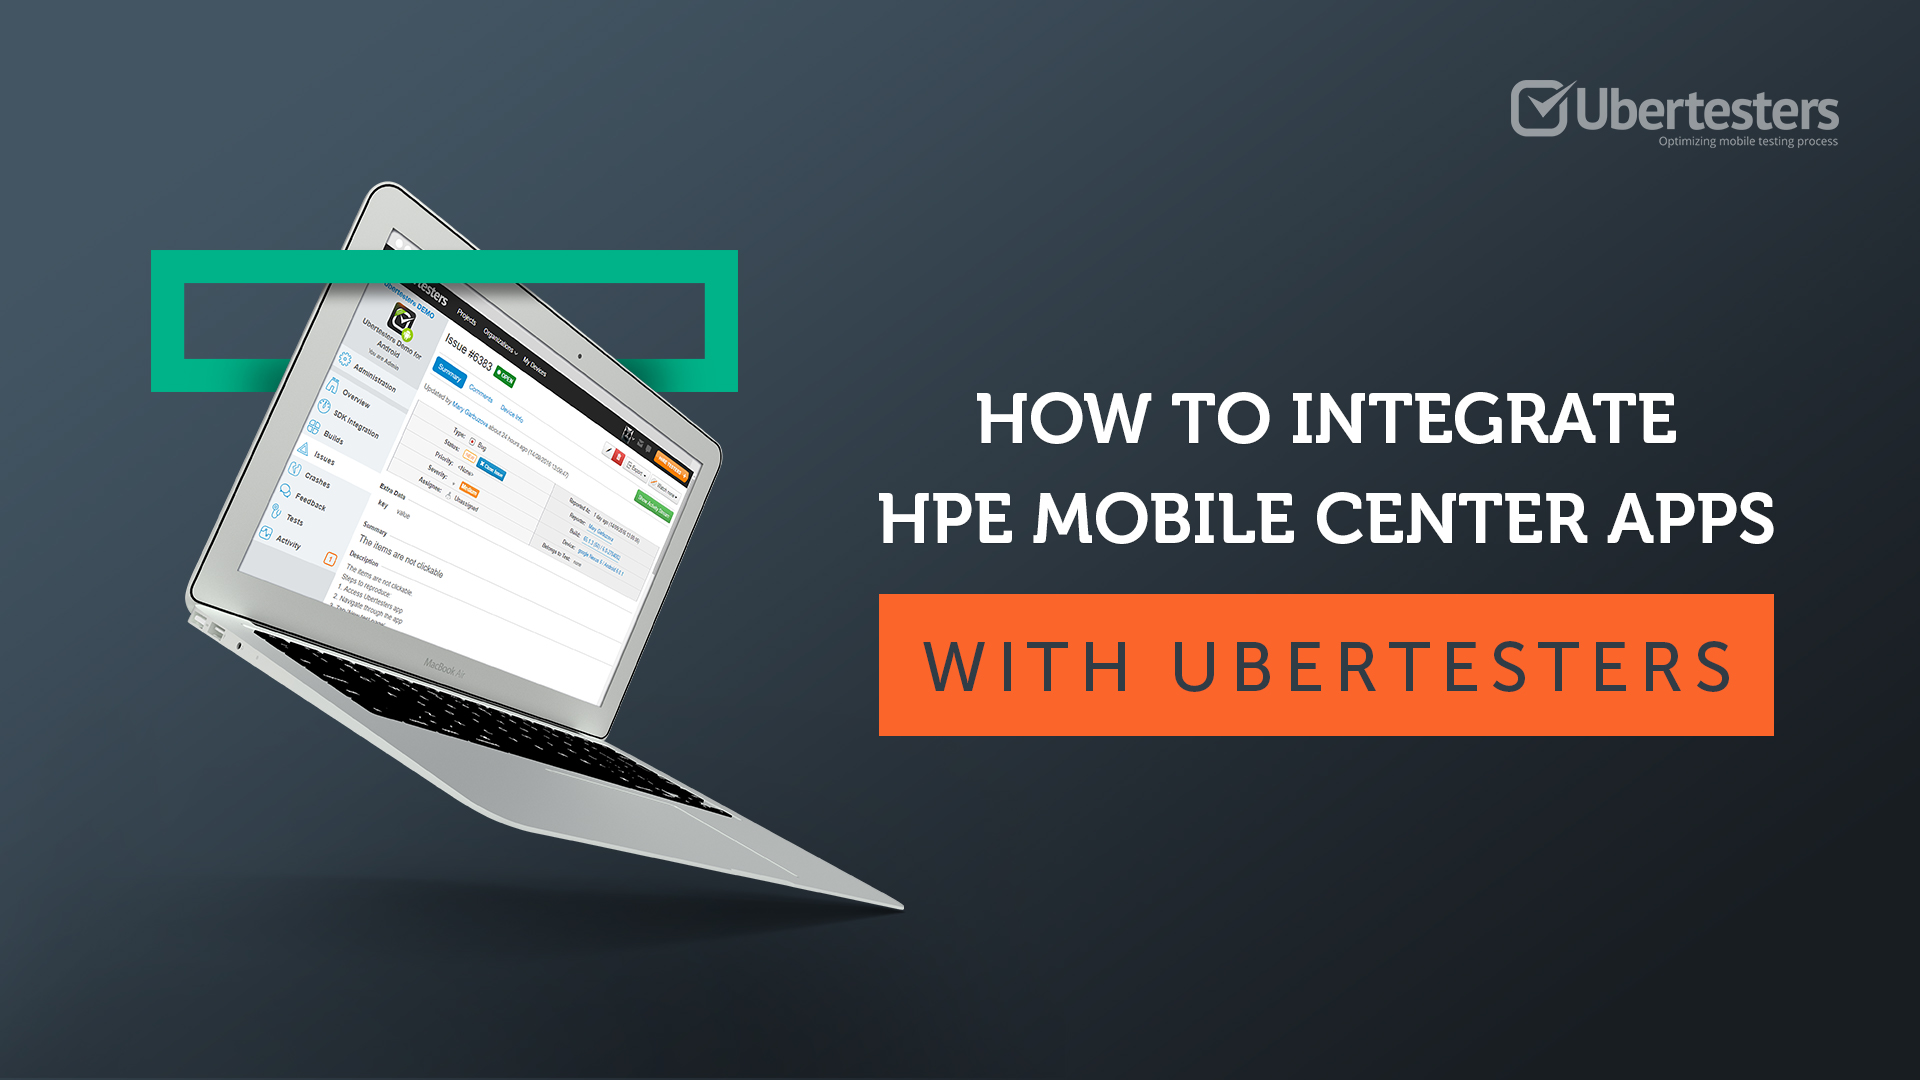 How to integrate the Ubertesters platform within your HPE Mobile Center